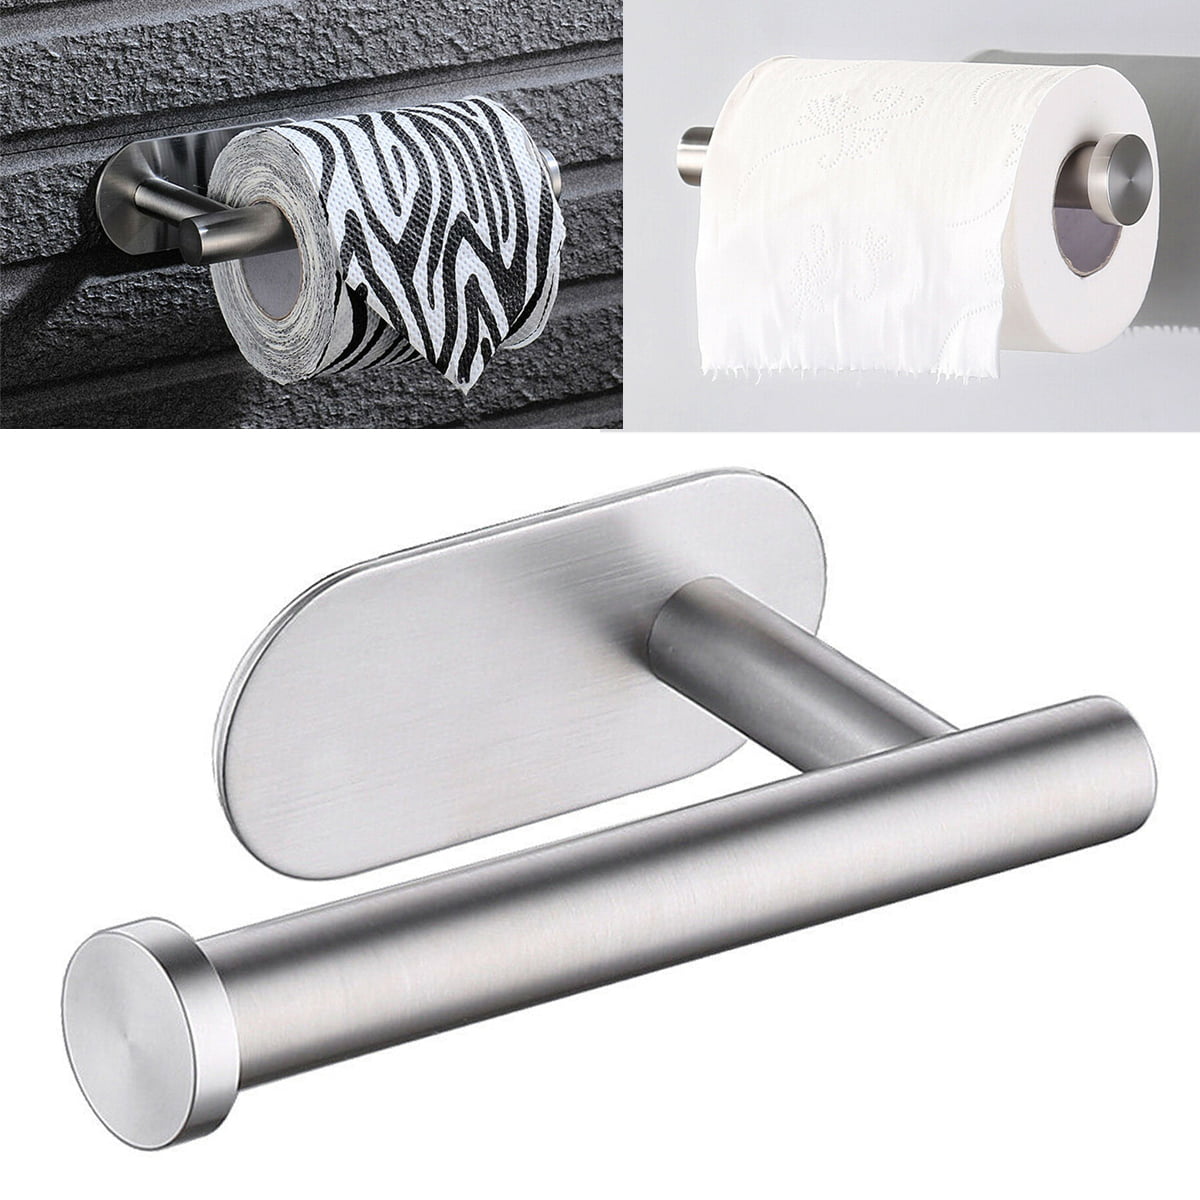 2x Stainless Steel Bathroom Toilet Paper Holder Roll Tissue Wall Mounted Silver 